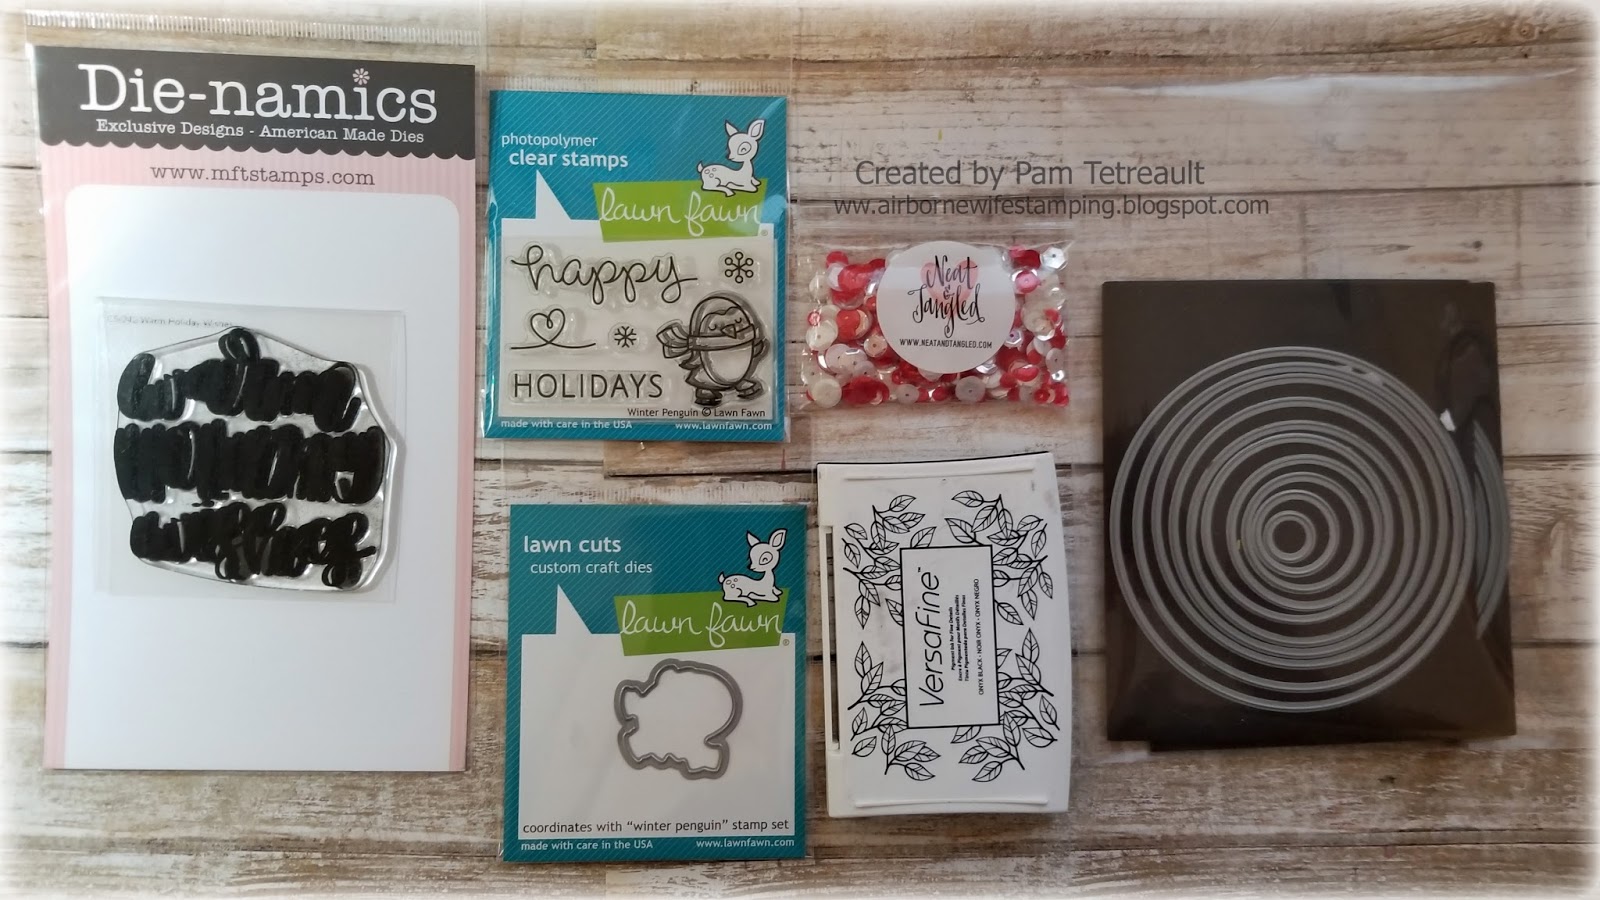 airbornewife's stamping spot: TupeloDesignsLLC DT Project 